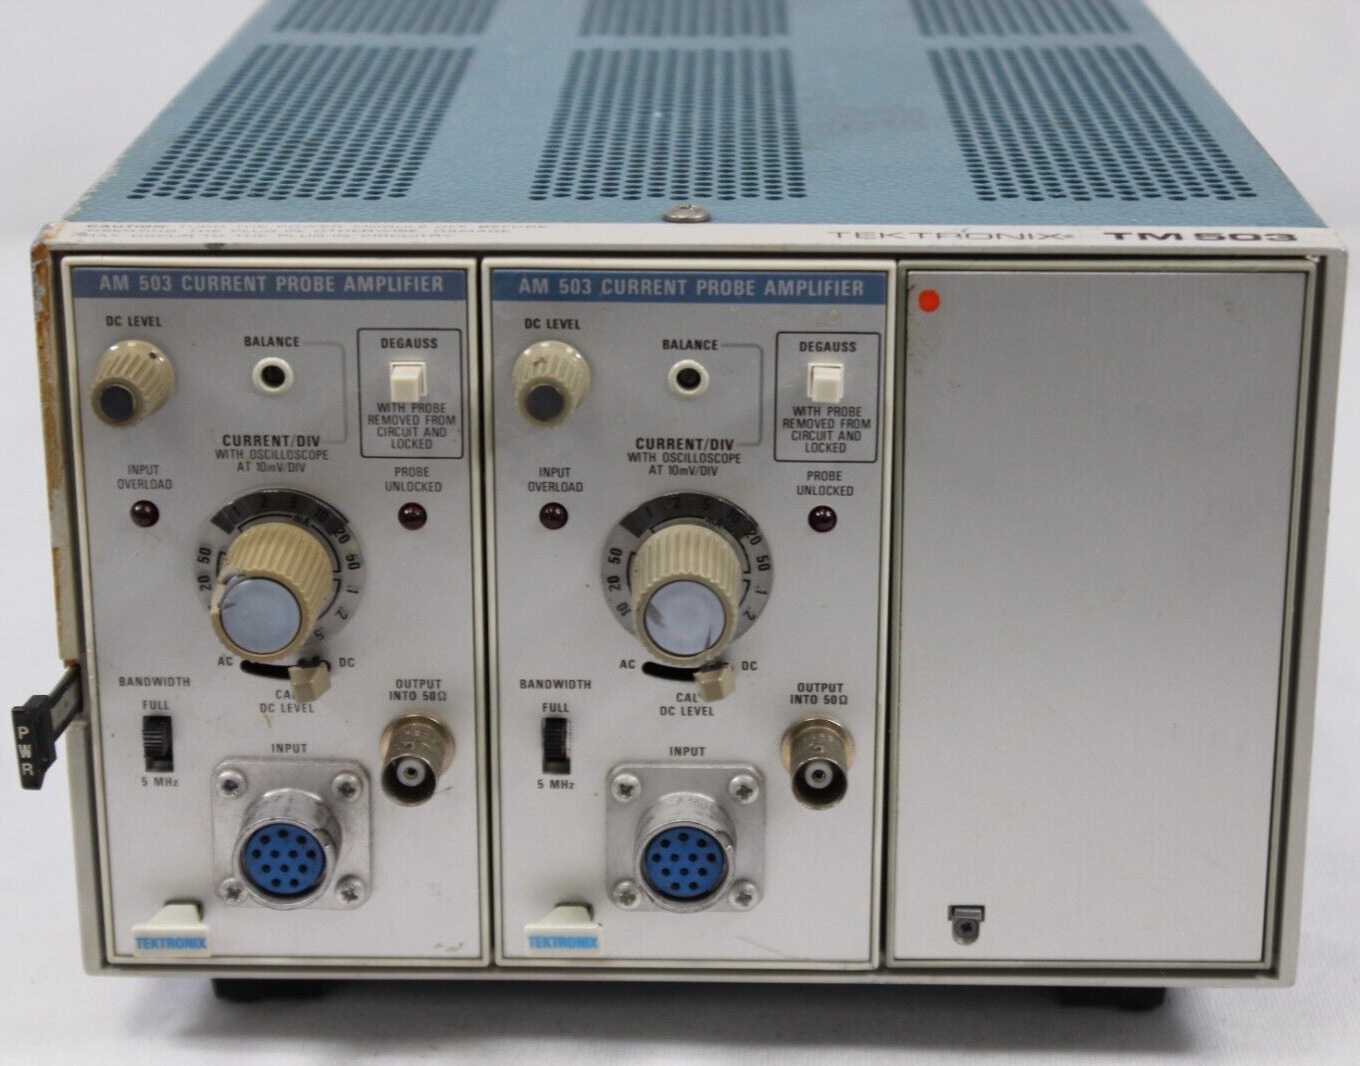 Tektronix TM503 Mainframe 3 - Slot Chassis WITH 2x AM503 CURRENT PROBE AMPLIFIER